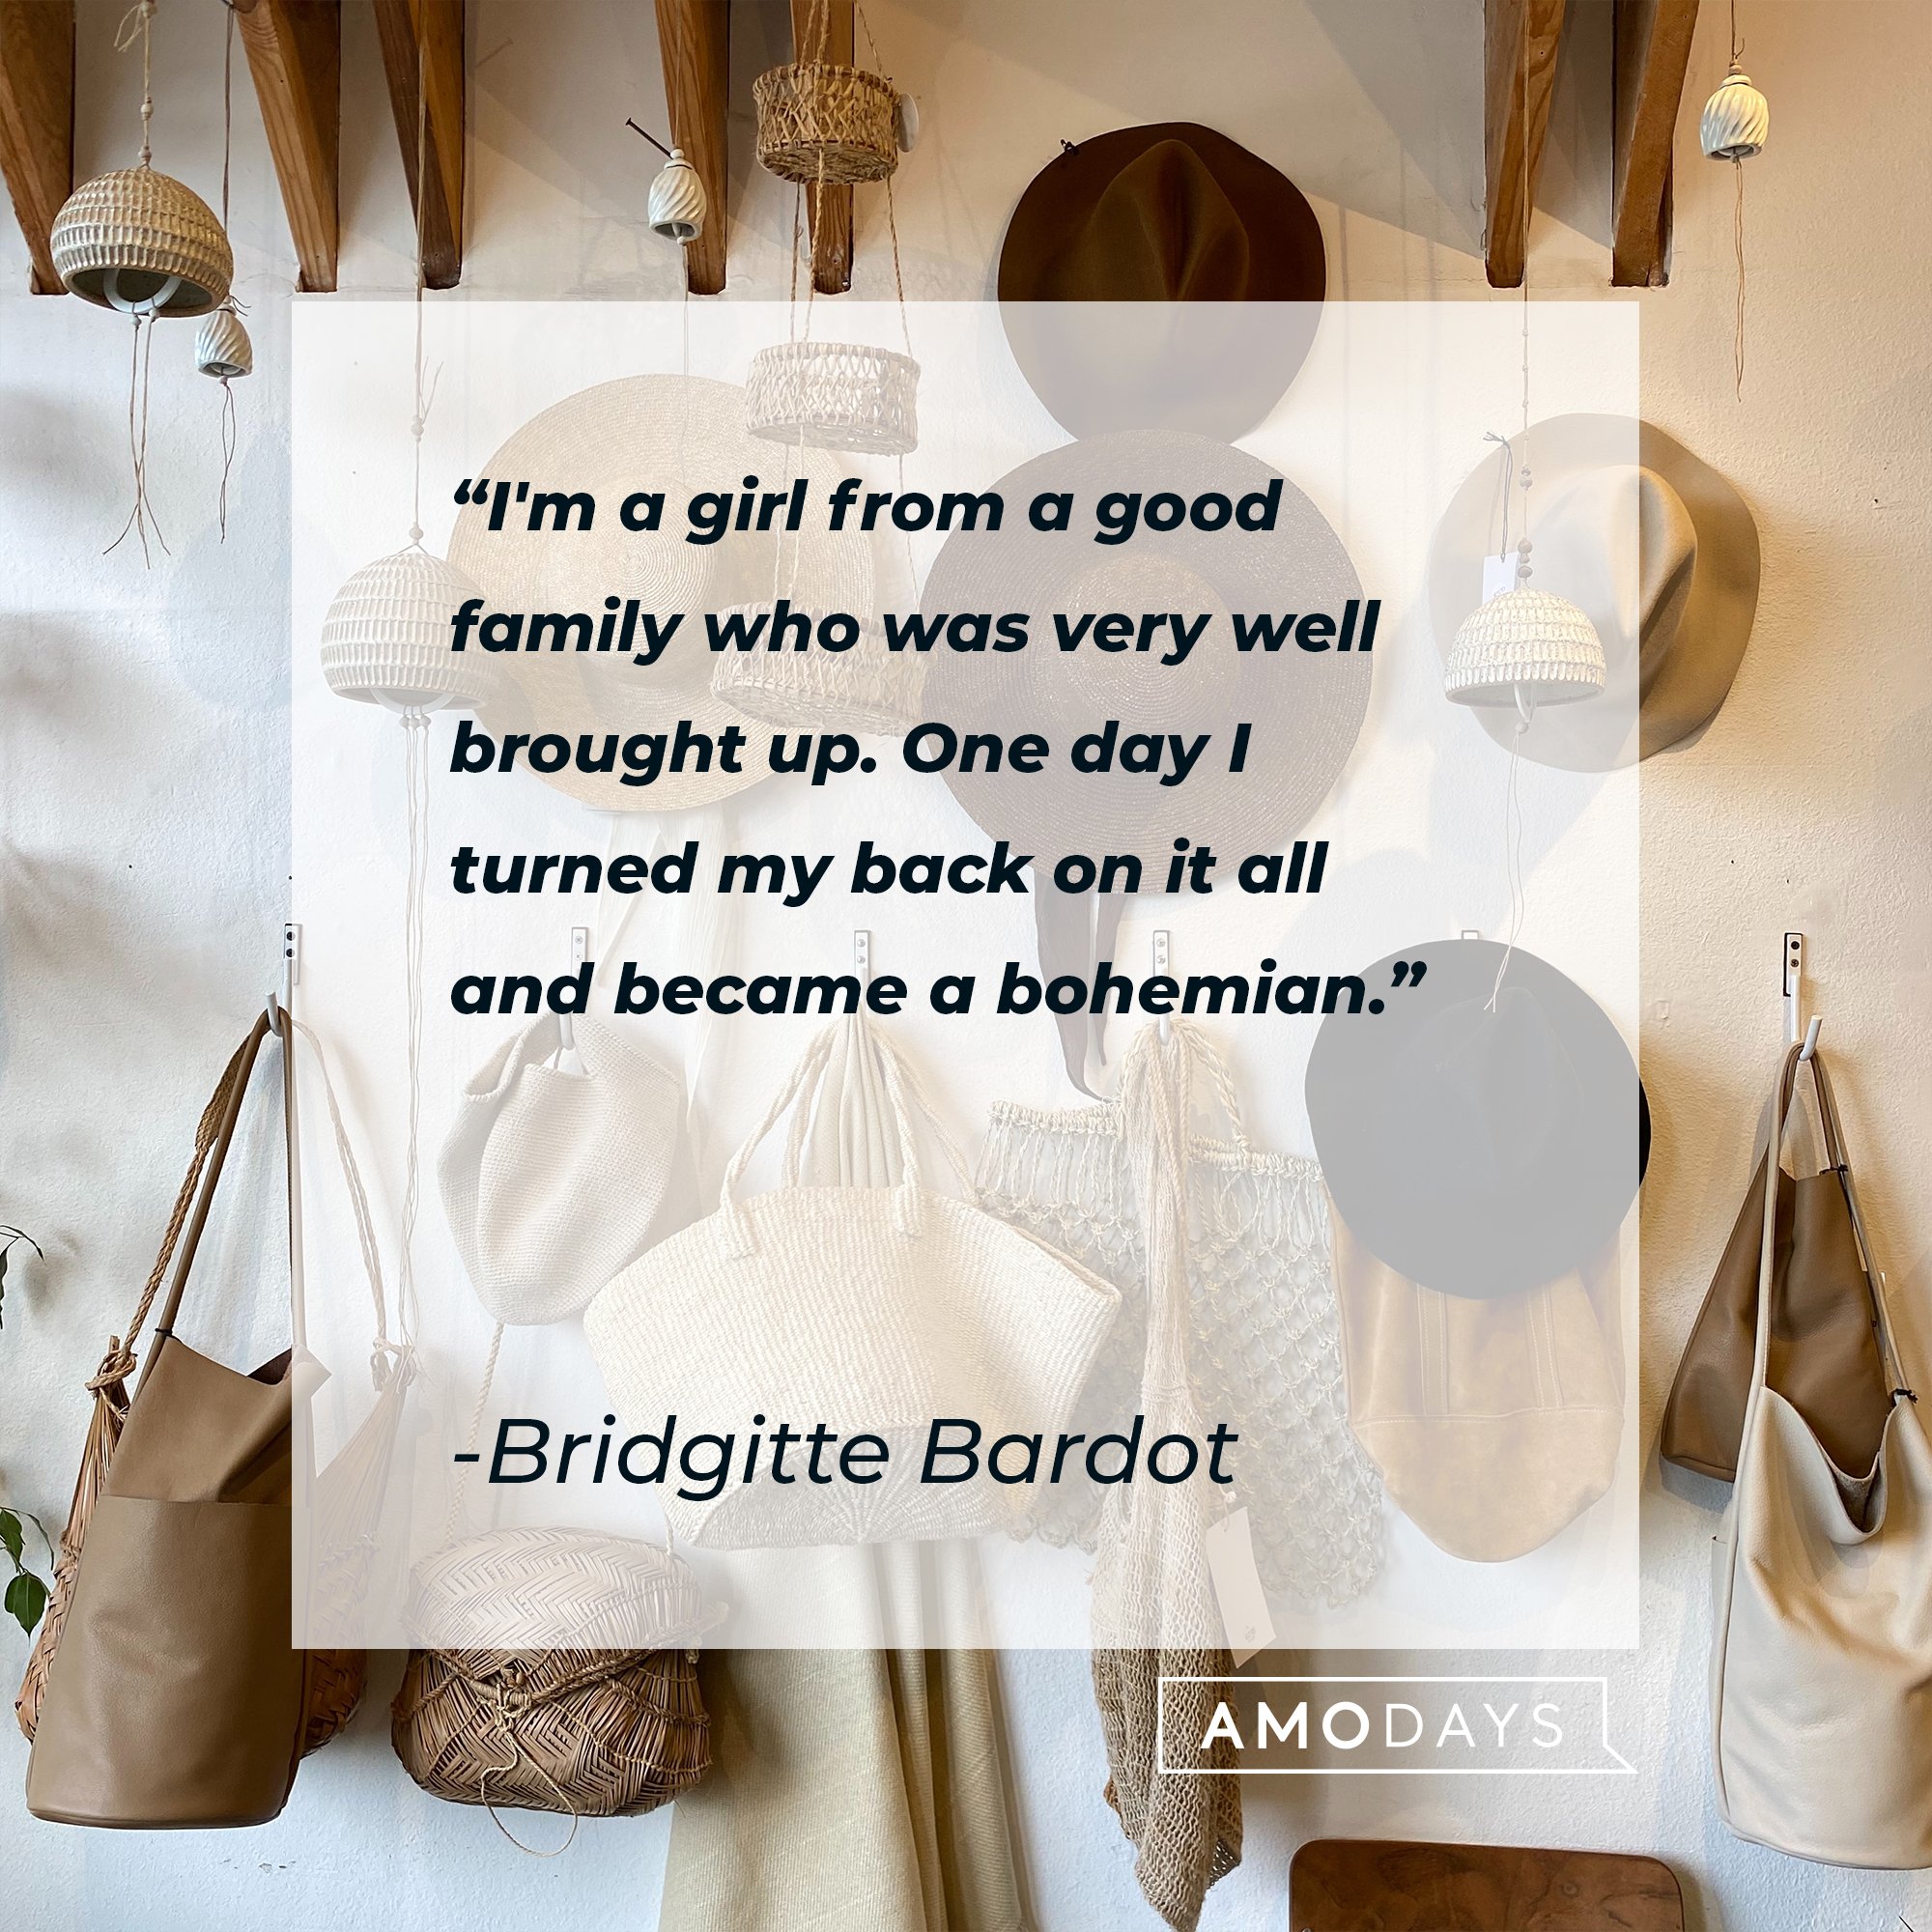 Bridgitte Bardot's quote: "I'm a girl from a good family who was very well brought up. One day I turned my back on it all and became a bohemian." | Image: AmoDays    